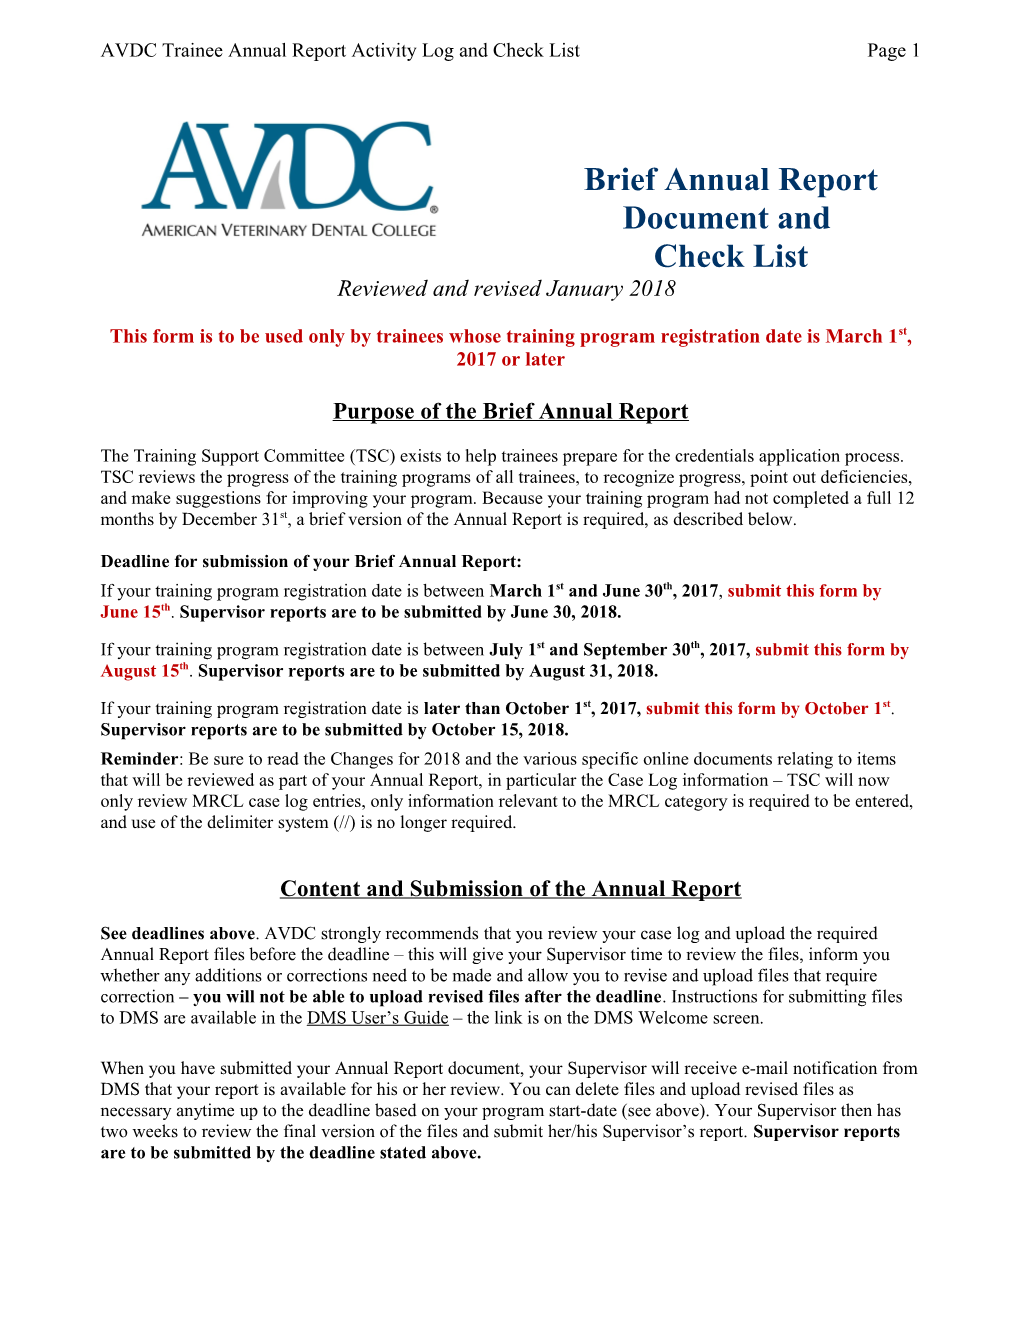 AVDC Trainee Annual Report Activity Log and Check List